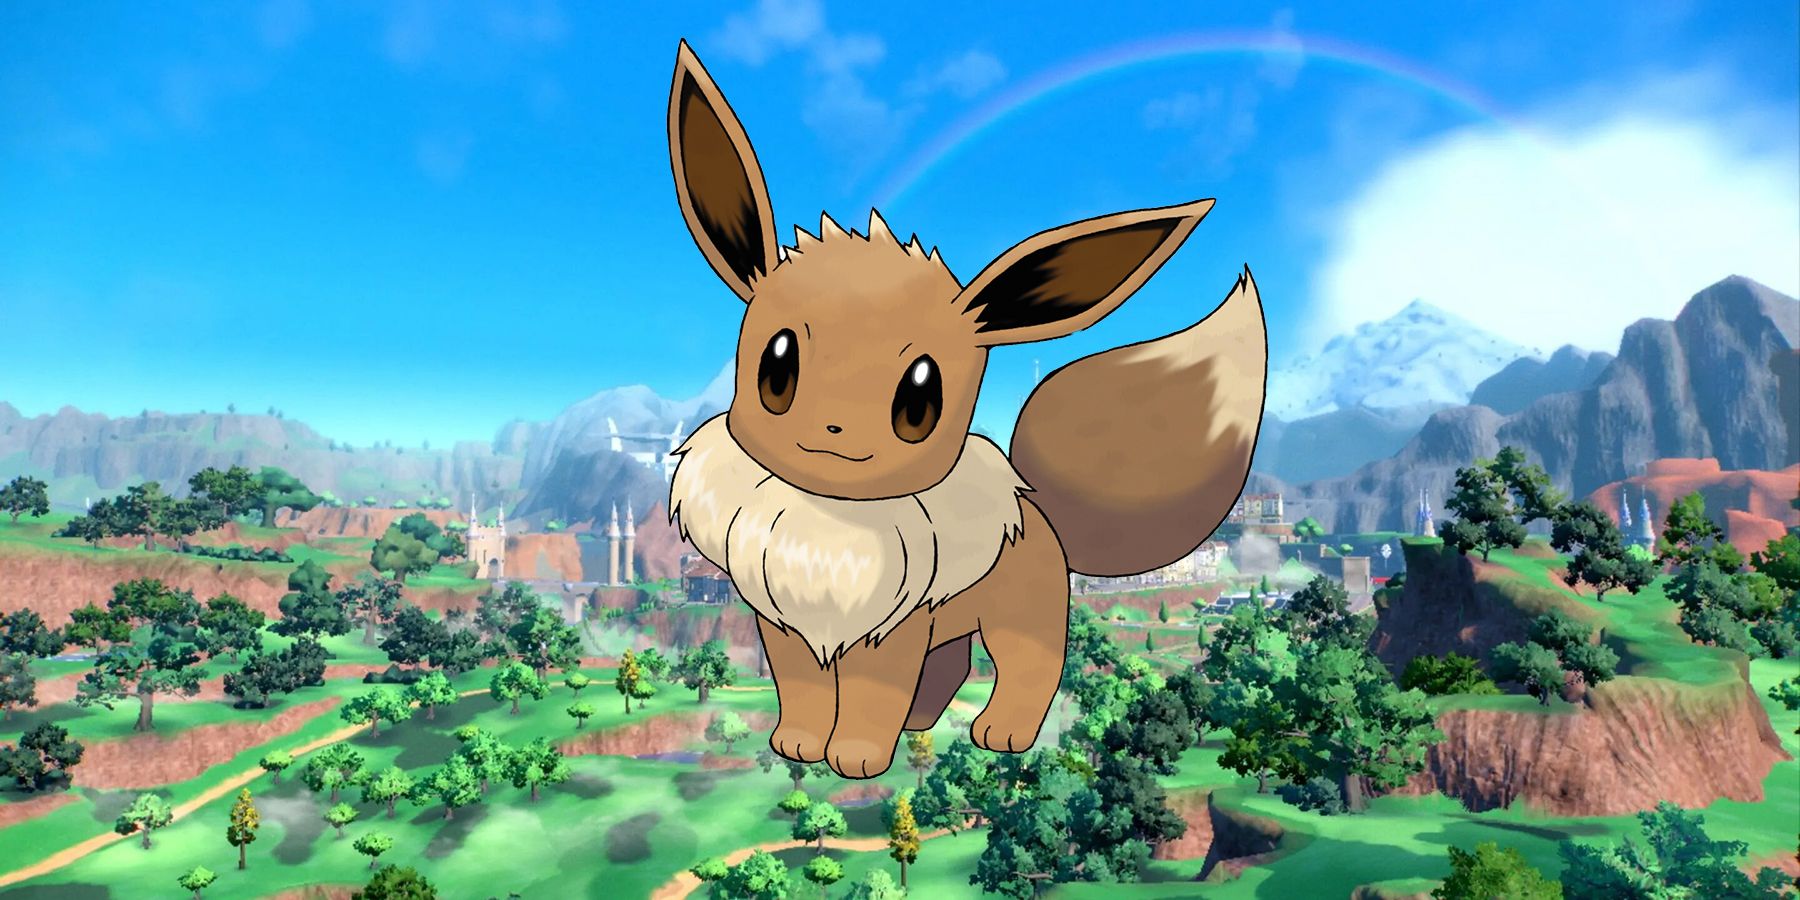 Eevee's starring role in Pokémon: Let's Go was inspired by fan art - The  Verge